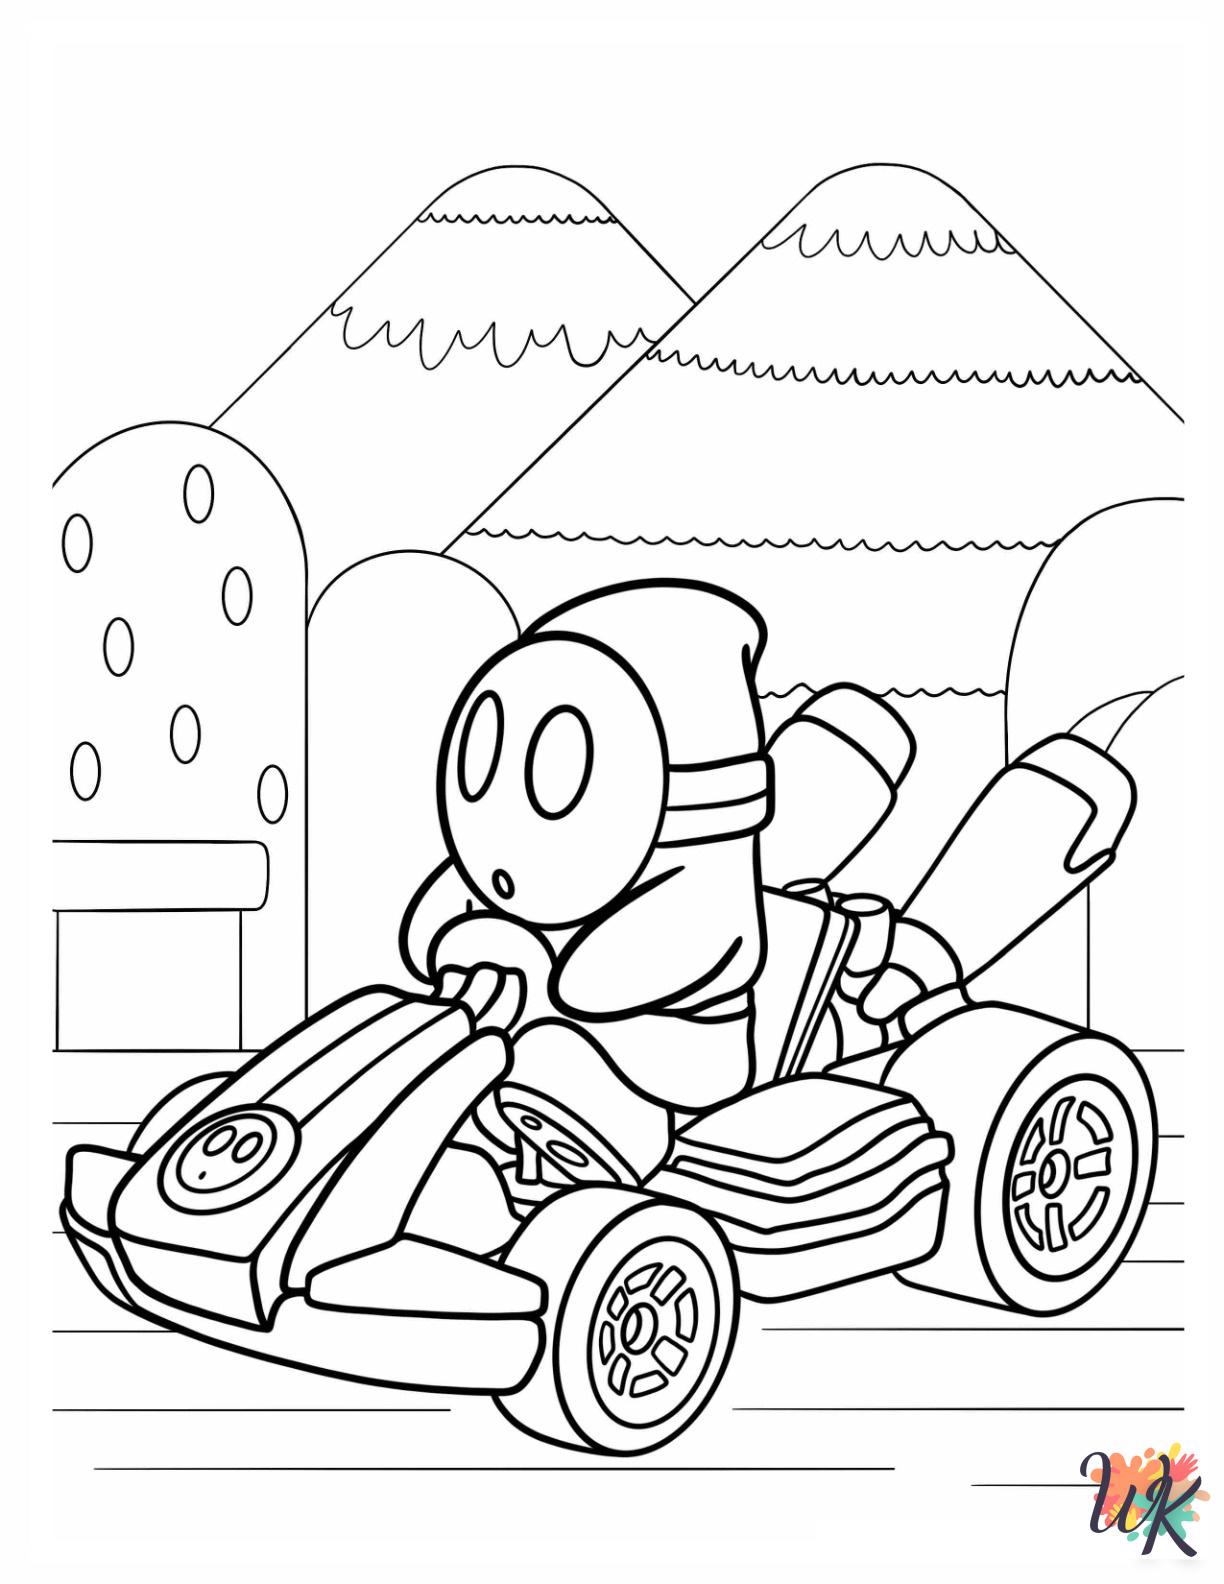 Shy Guy coloring pages pdf